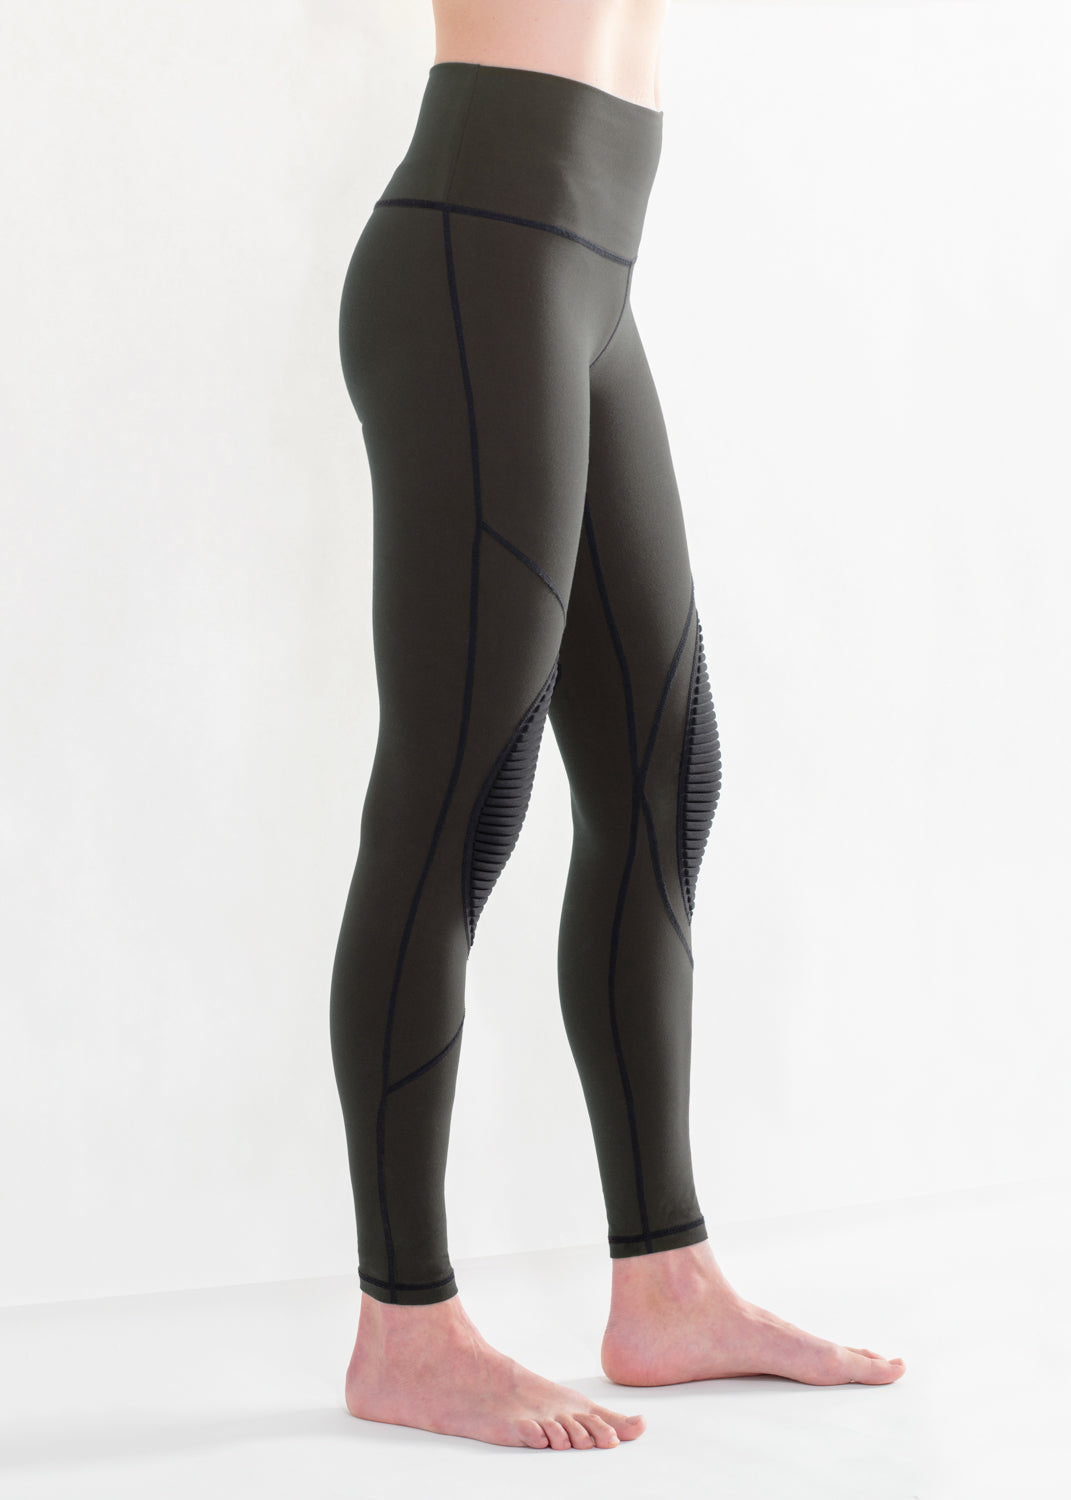 Best Leggings for Work Out Every Women Should Own